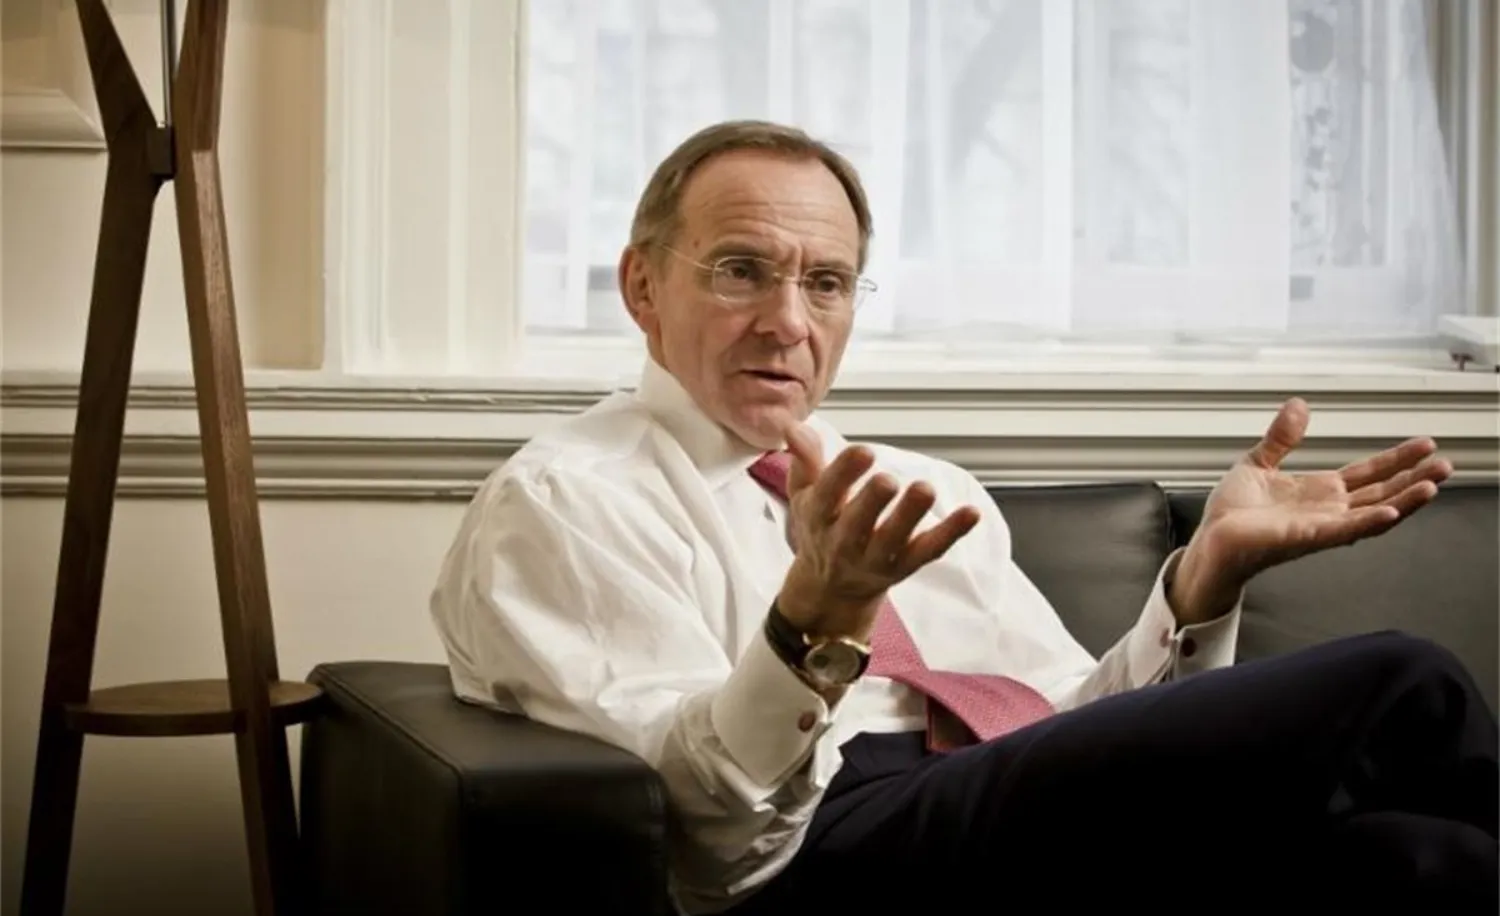 Diageo to appoint Sir John Manzoni as Chair of the Board